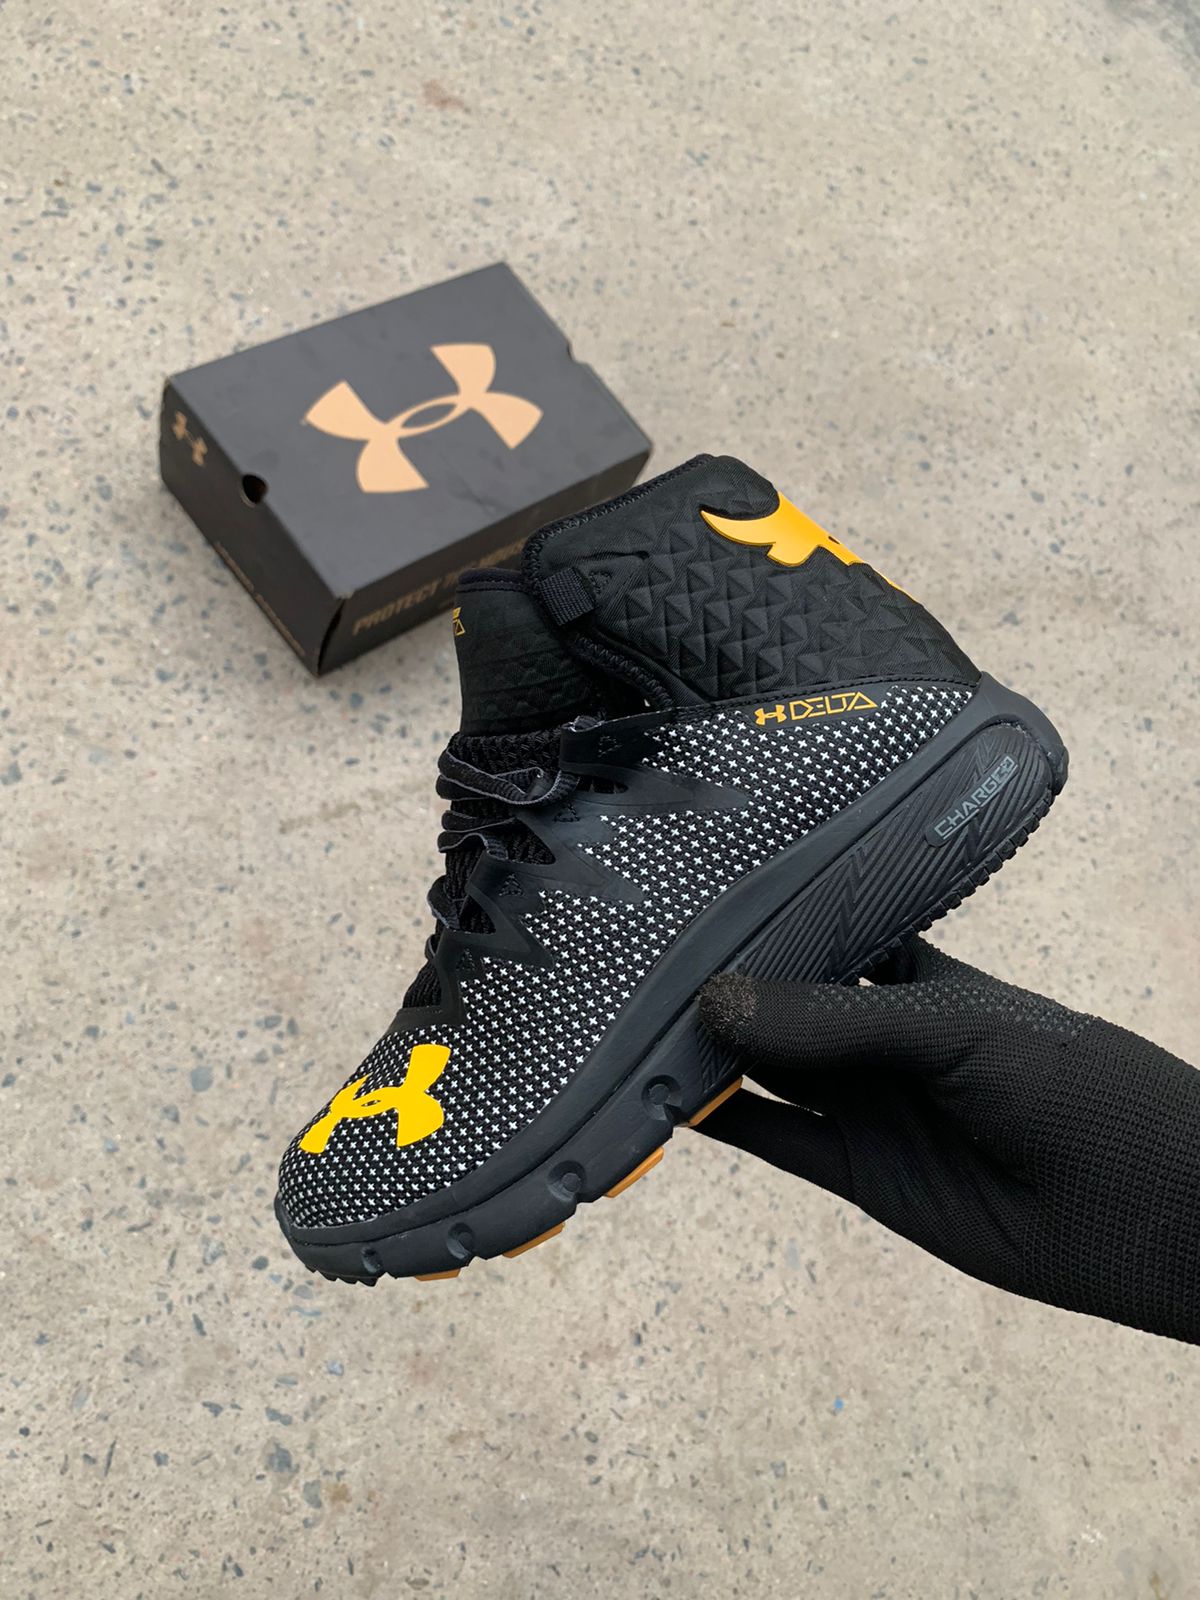 Undeararmour Rock delta shoes on sale- Black and yellow 